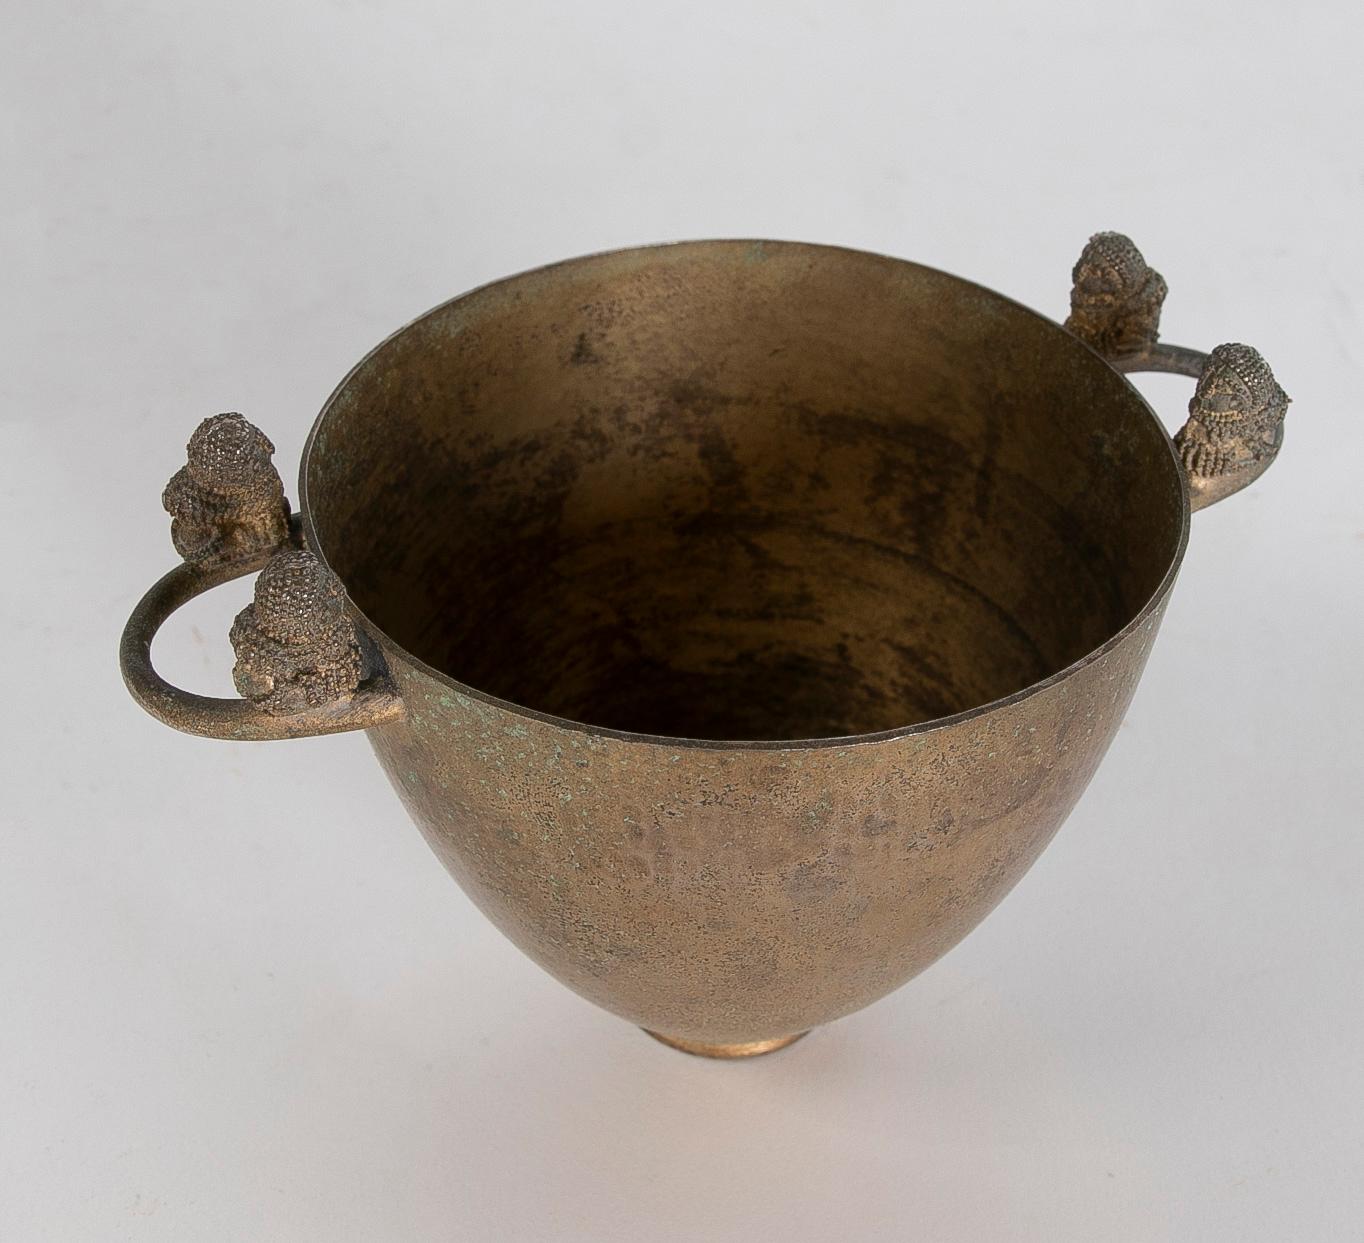 Oriental Bronze Vessel with Handles on the Sides.